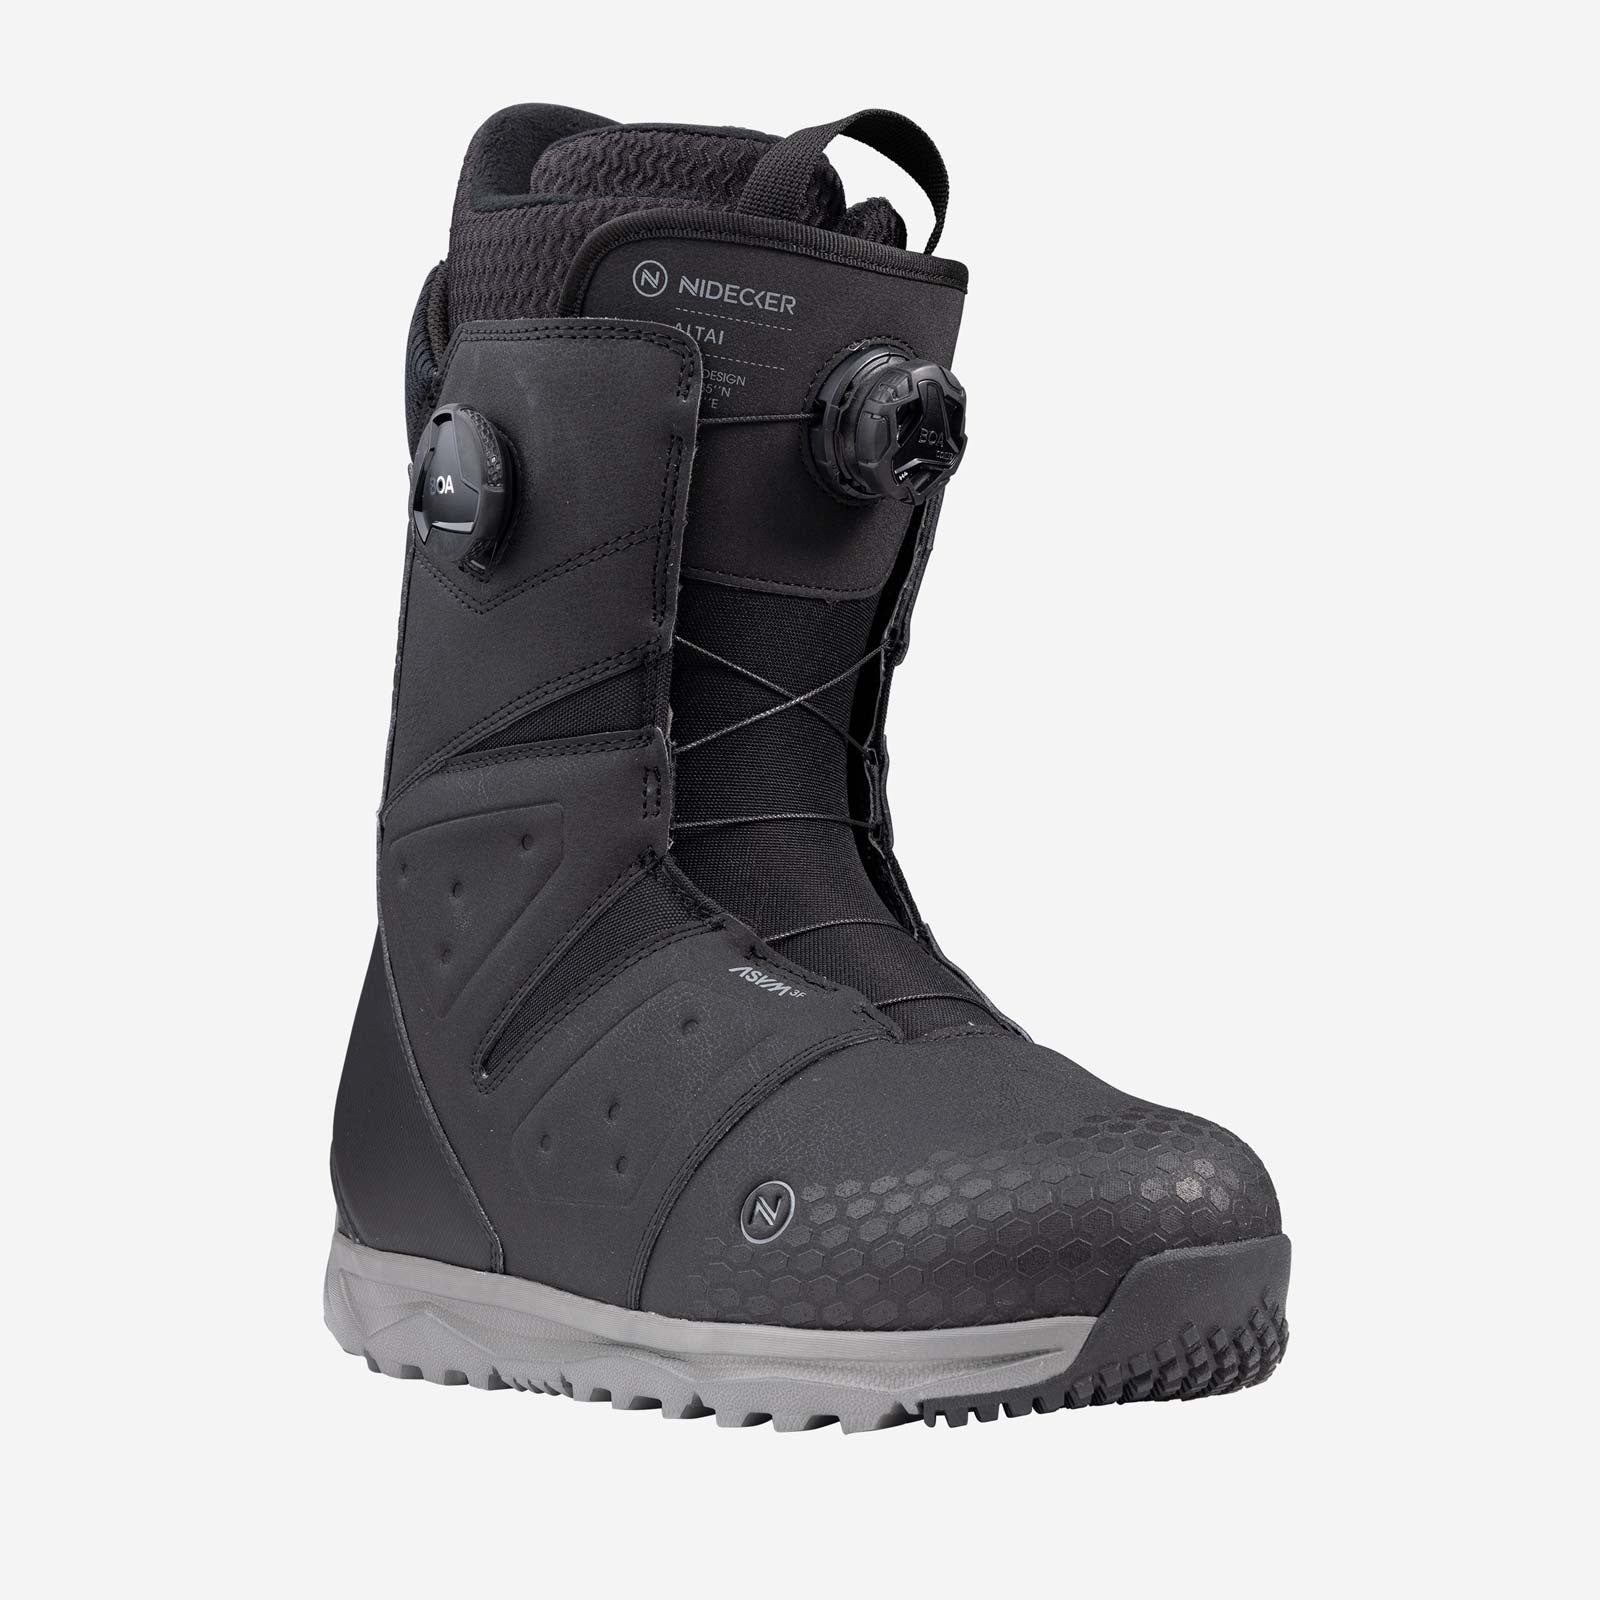 The Altai is the centrepiece of the new Nidecker boot collection, offering premium features and freeride-friendly support at an unbeatable price. It’s built around an asymmetrical upper that fits perfectly with Nidecker and Flow binding straps, eliminating pressure points.